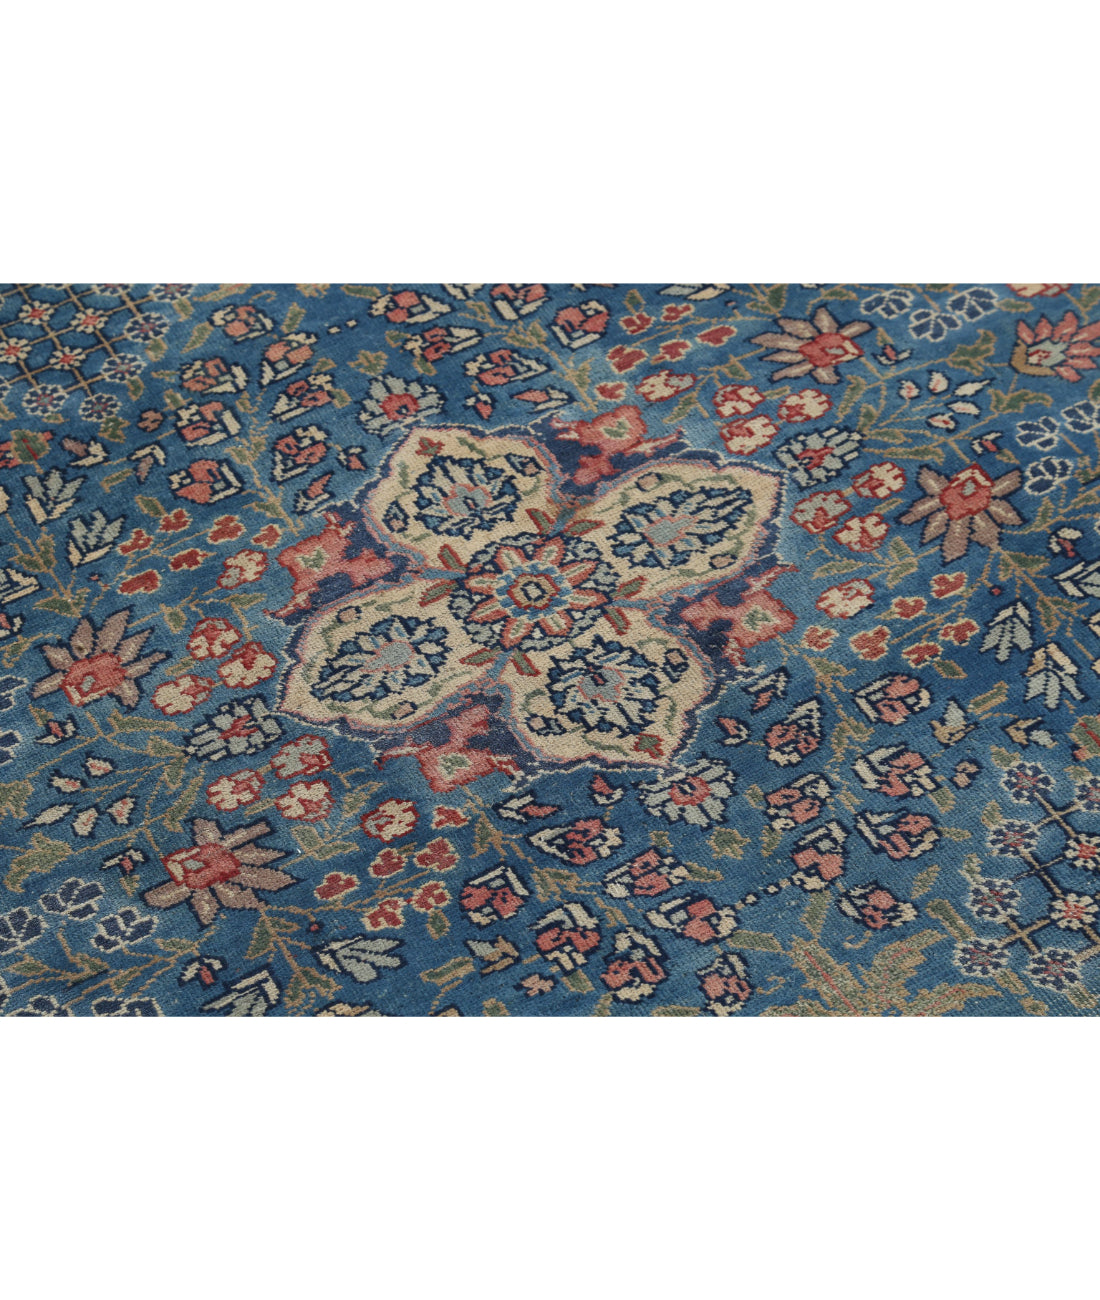 Hand Knotted Antique Persian Tabriz Wool Rug - 8'6'' x 11'3'' 8'6'' x 11'3'' (255 X 338) / Pink / Blue